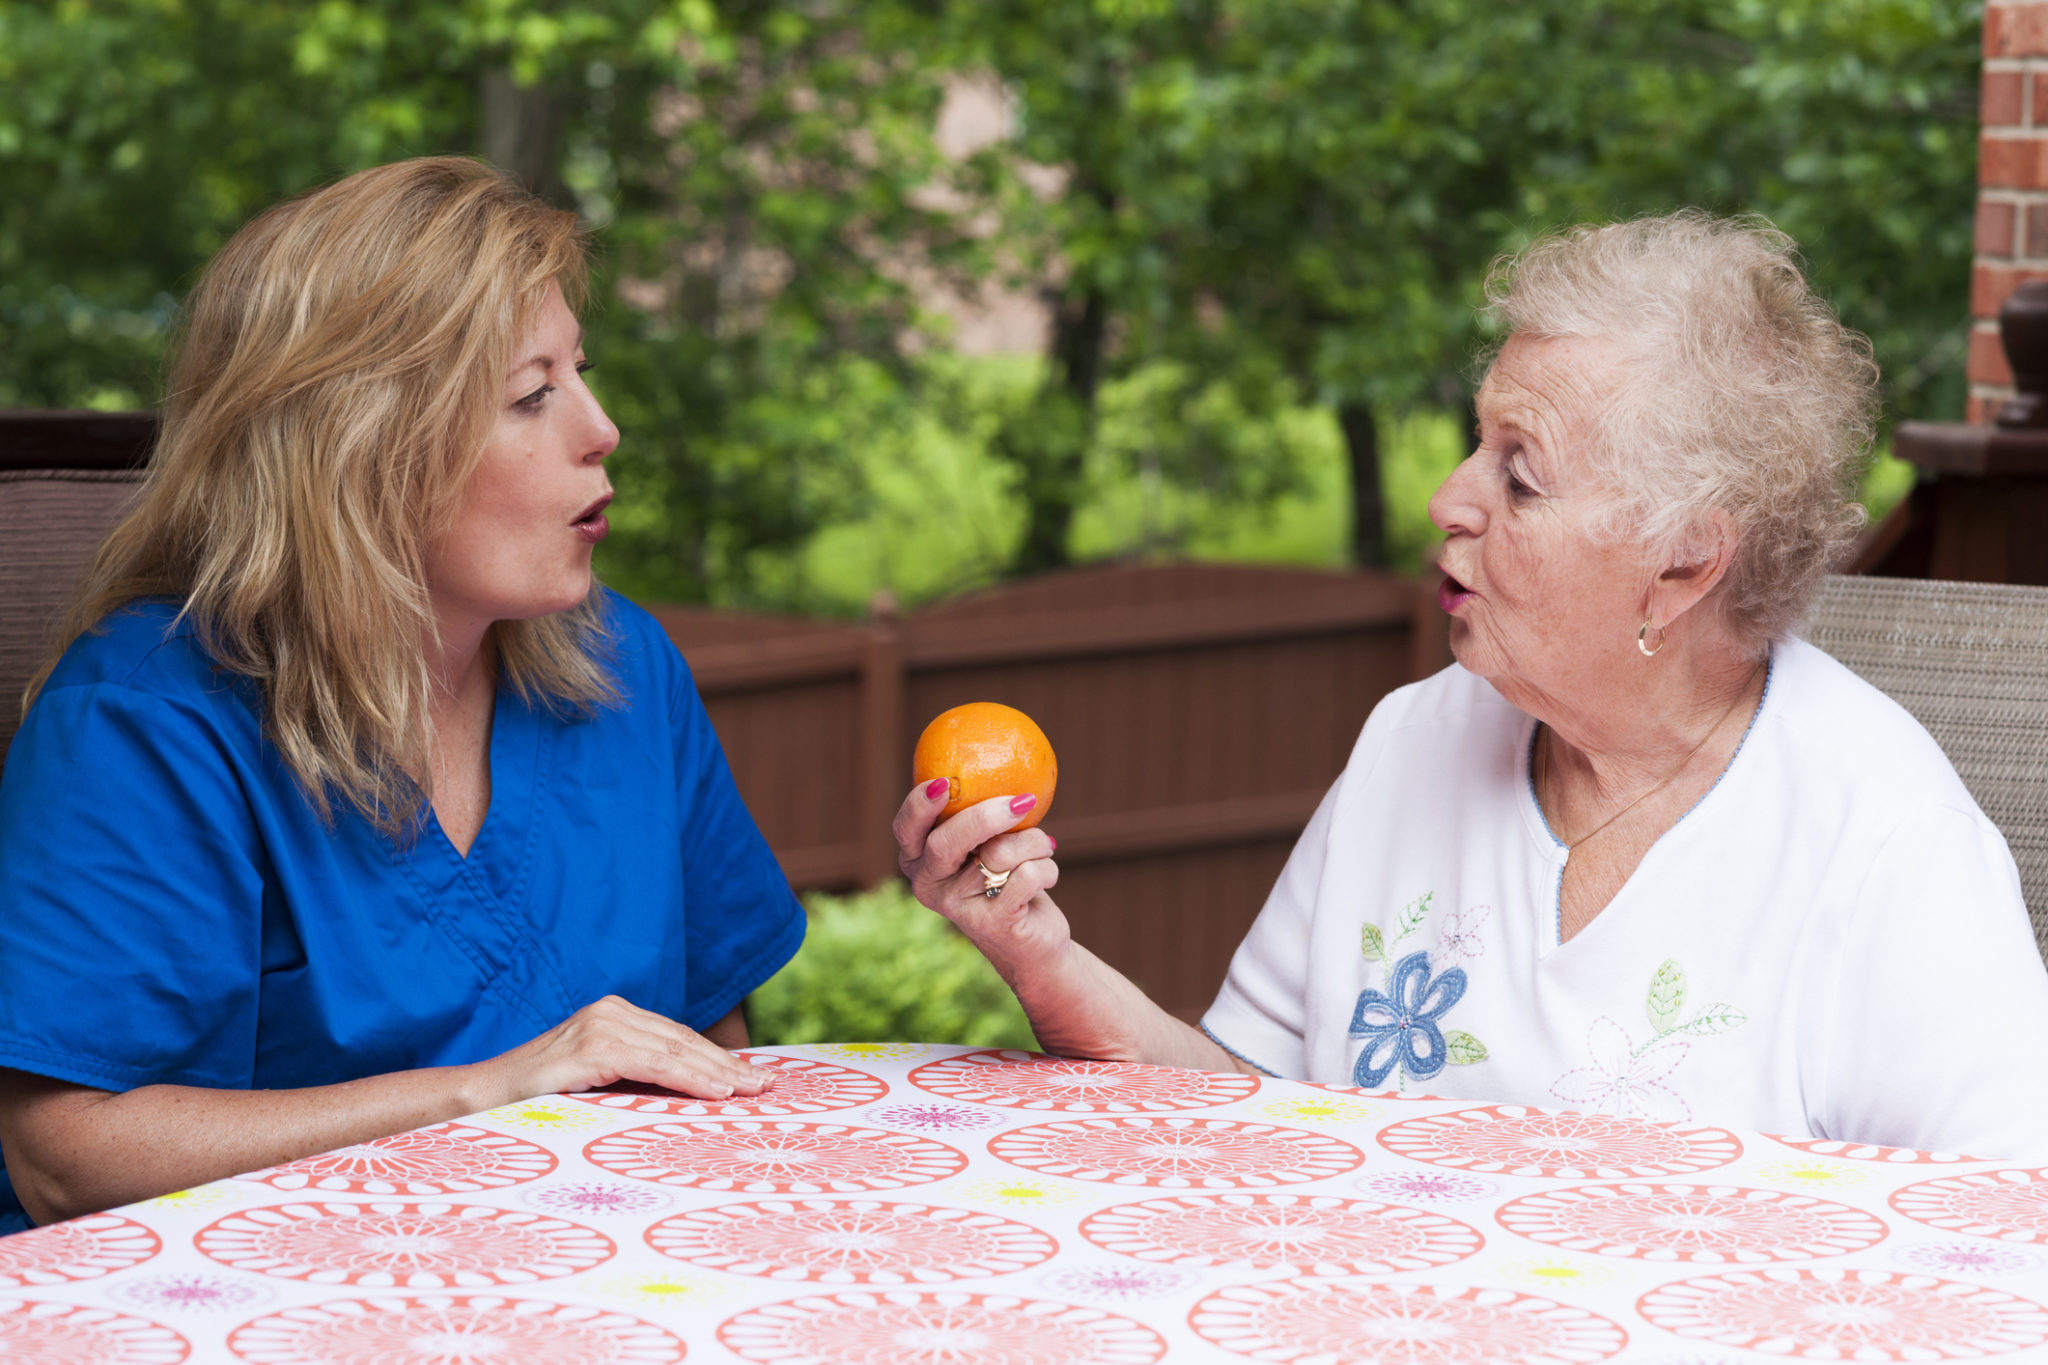 Speech therapist with female stroke patient outdoors during a home health therapy session modeling the production of a consonant during speech training for apraxia